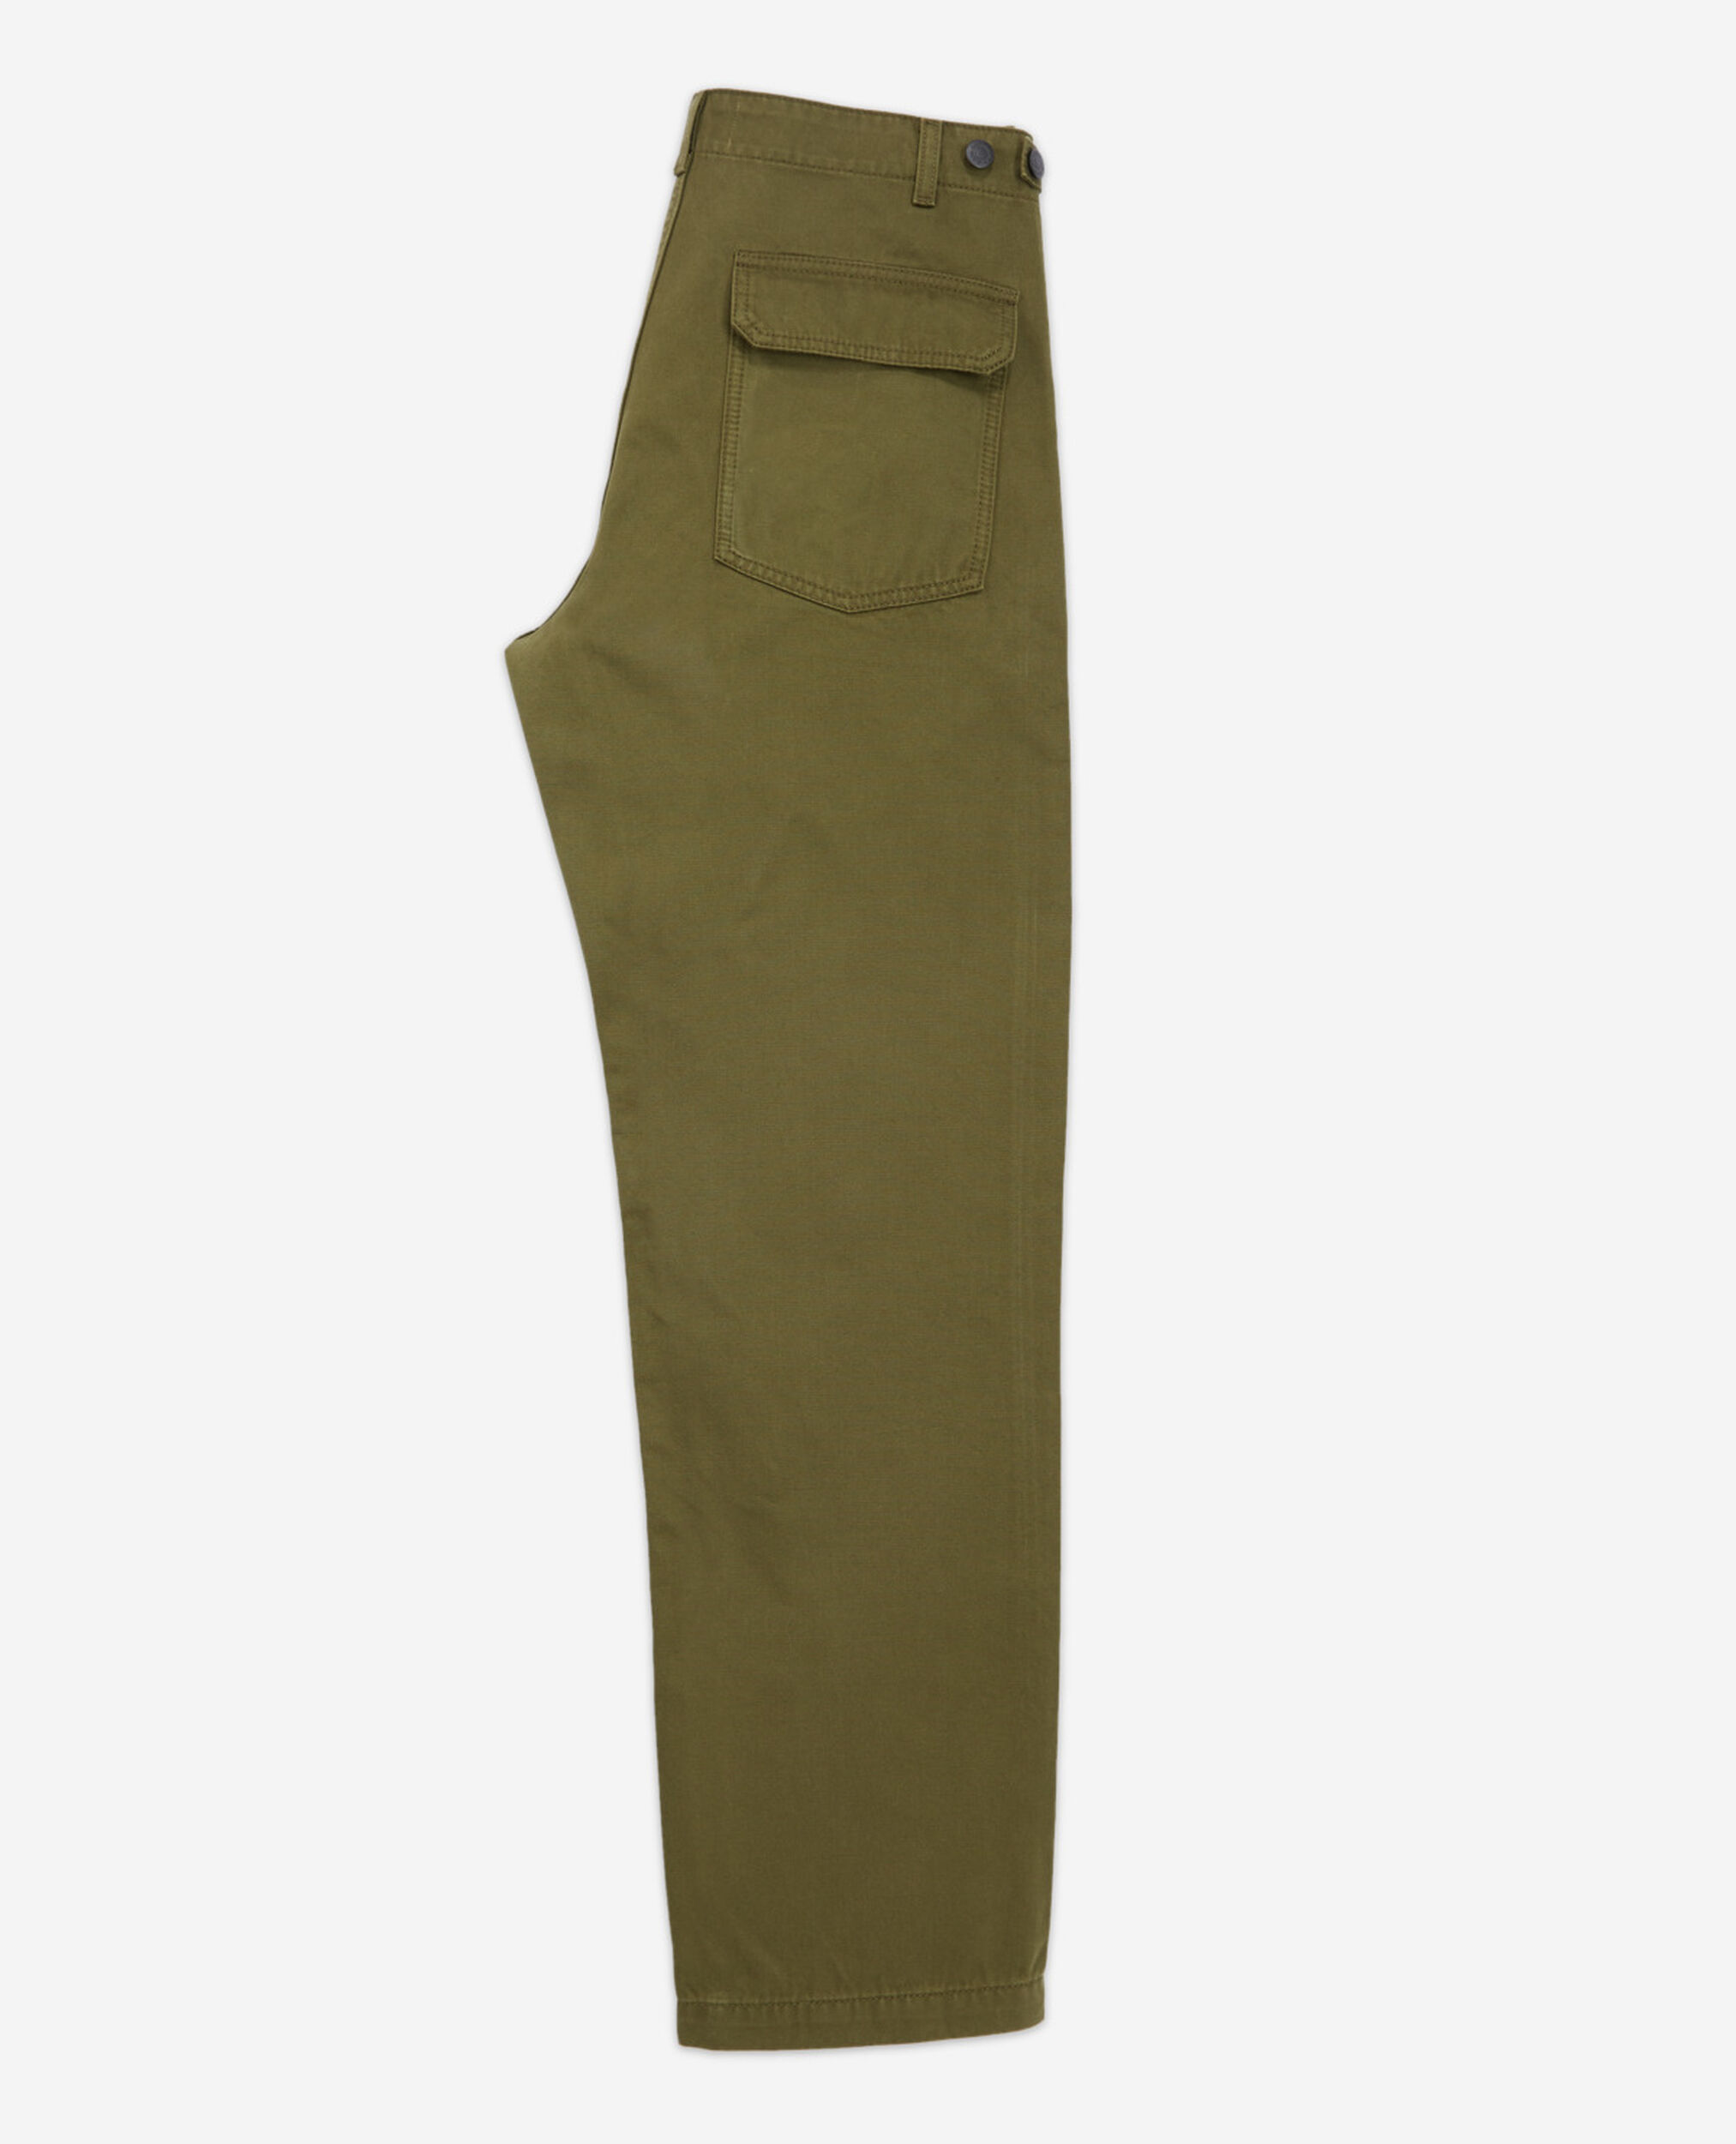 Beige chino pants with side pockets, DARK KAKI, hi-res image number null